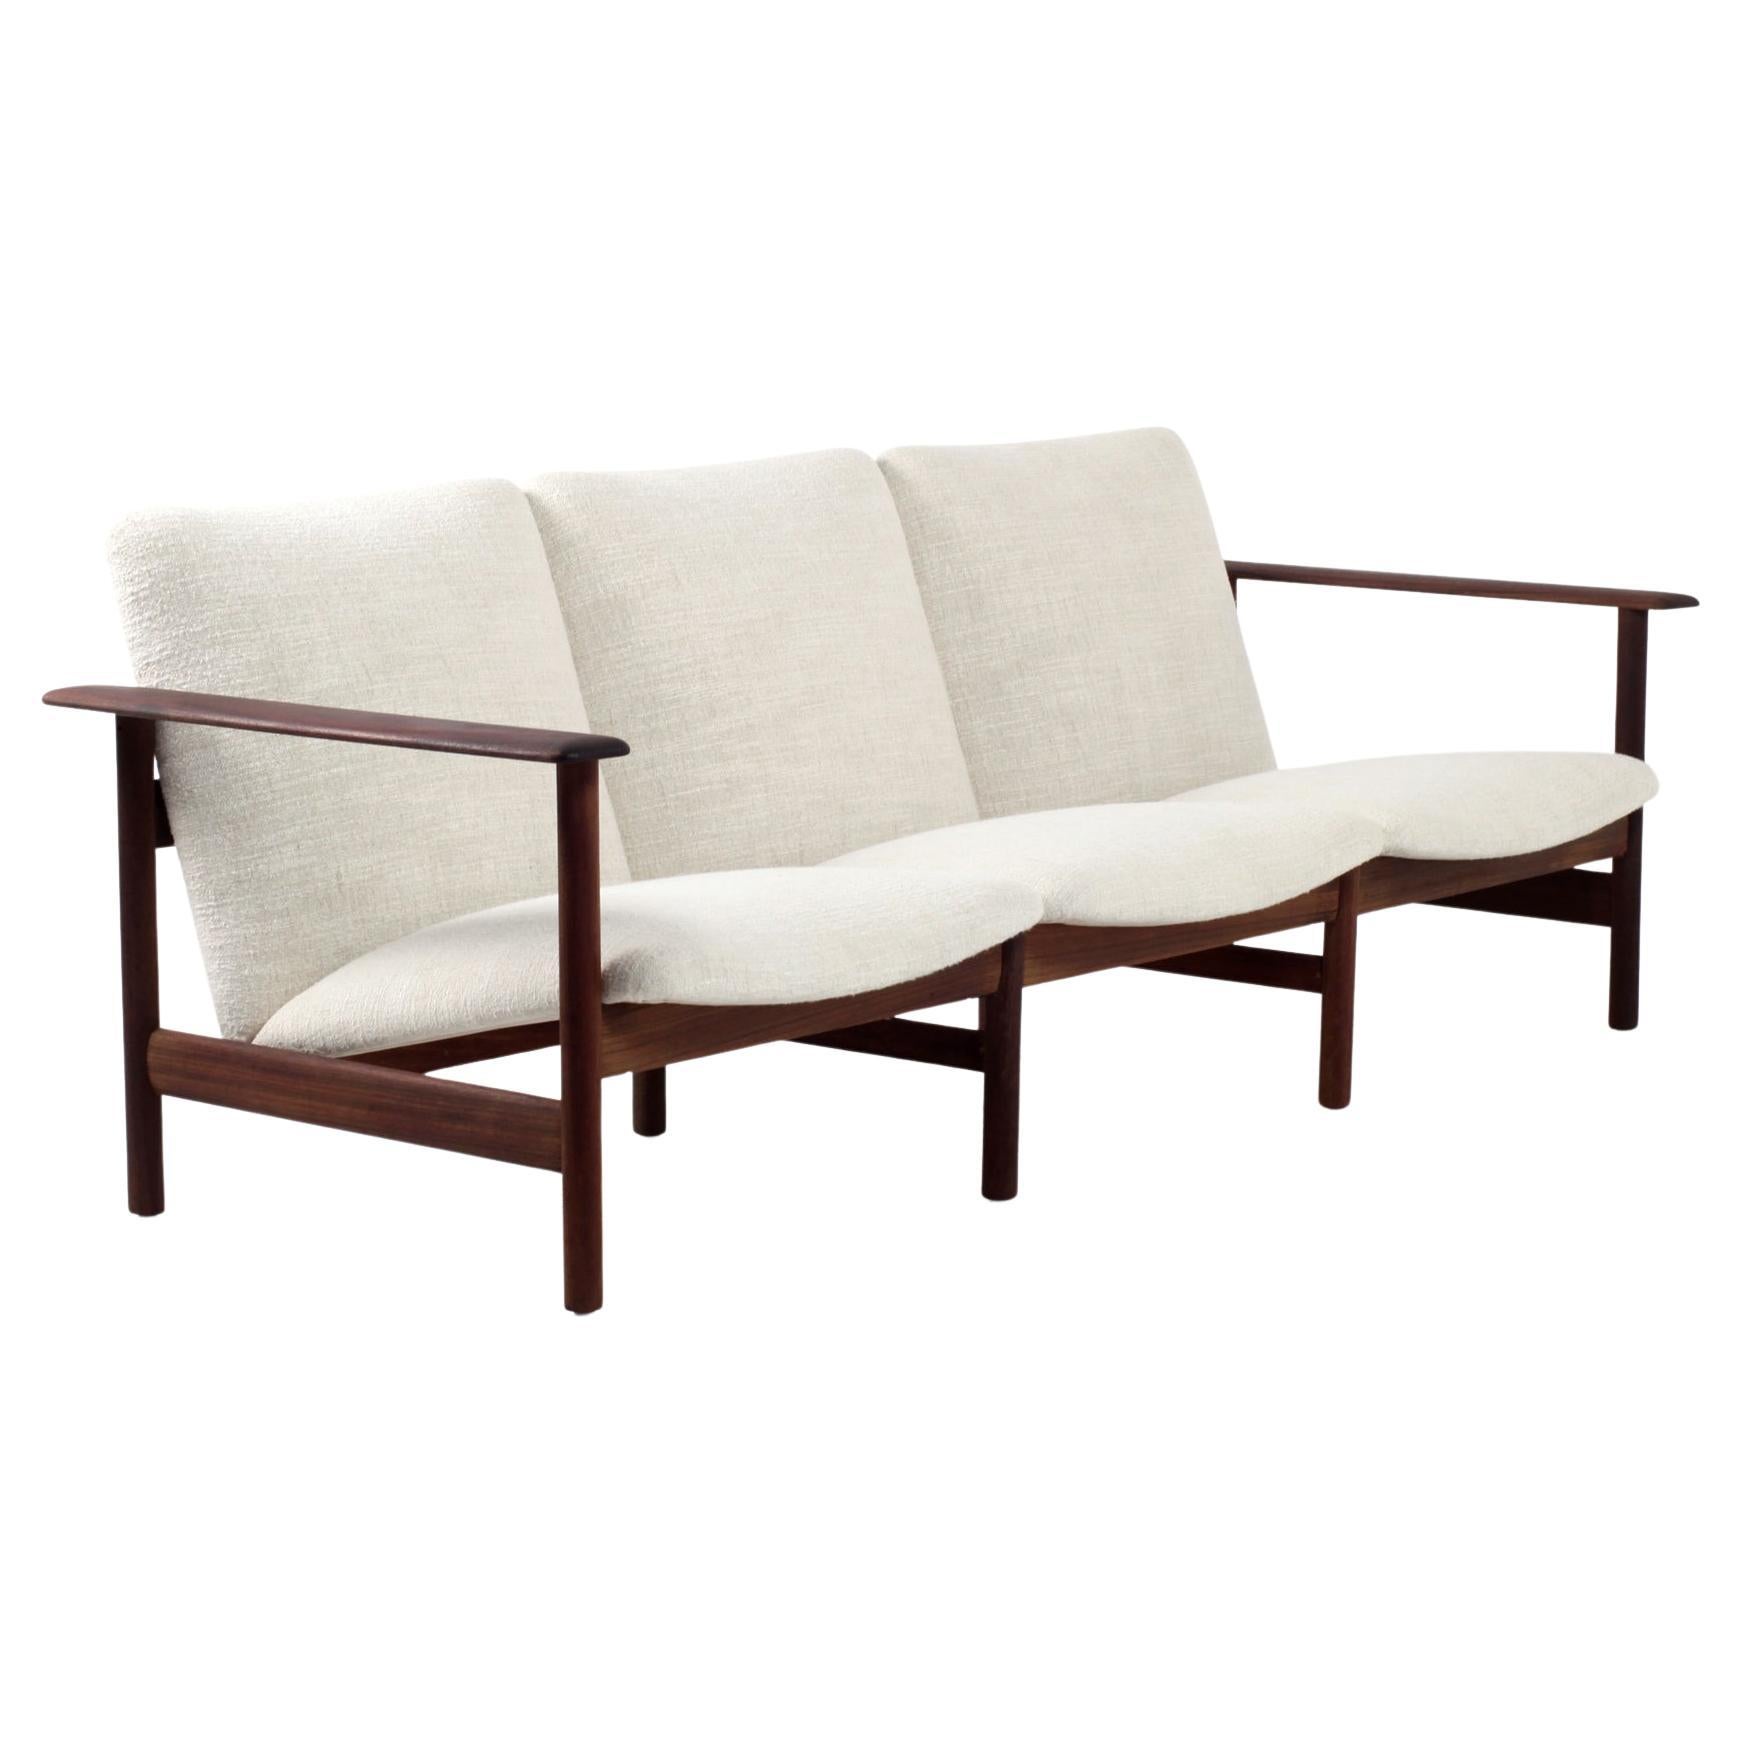 Steiner Sofa Solid Wood Frame and Pierre Frey Fabric, France, 1960s For Sale